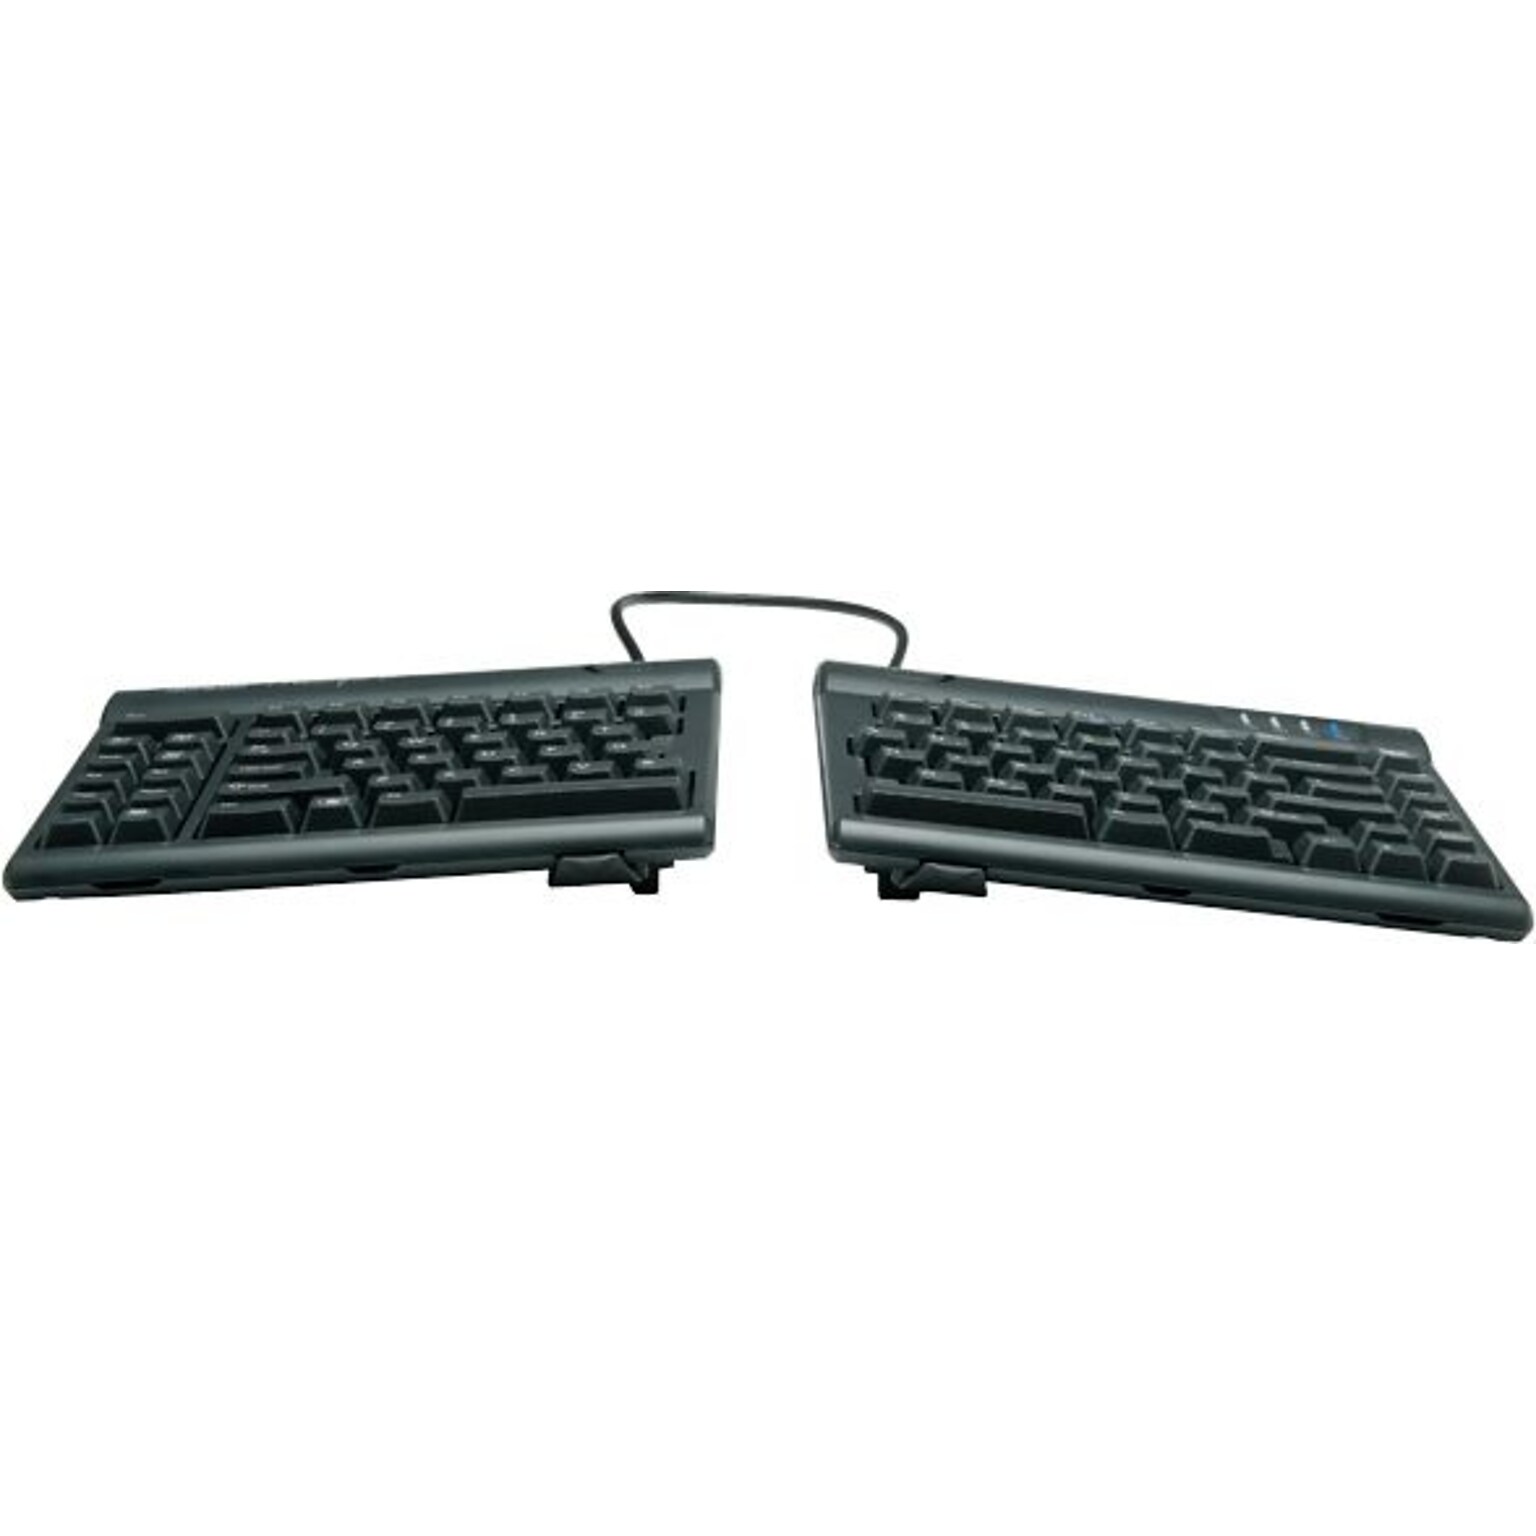 Kinesis Freestyle2 for PC with V3 Accessory Pre-Installed Wired Keyboard, Black (KB830PB)